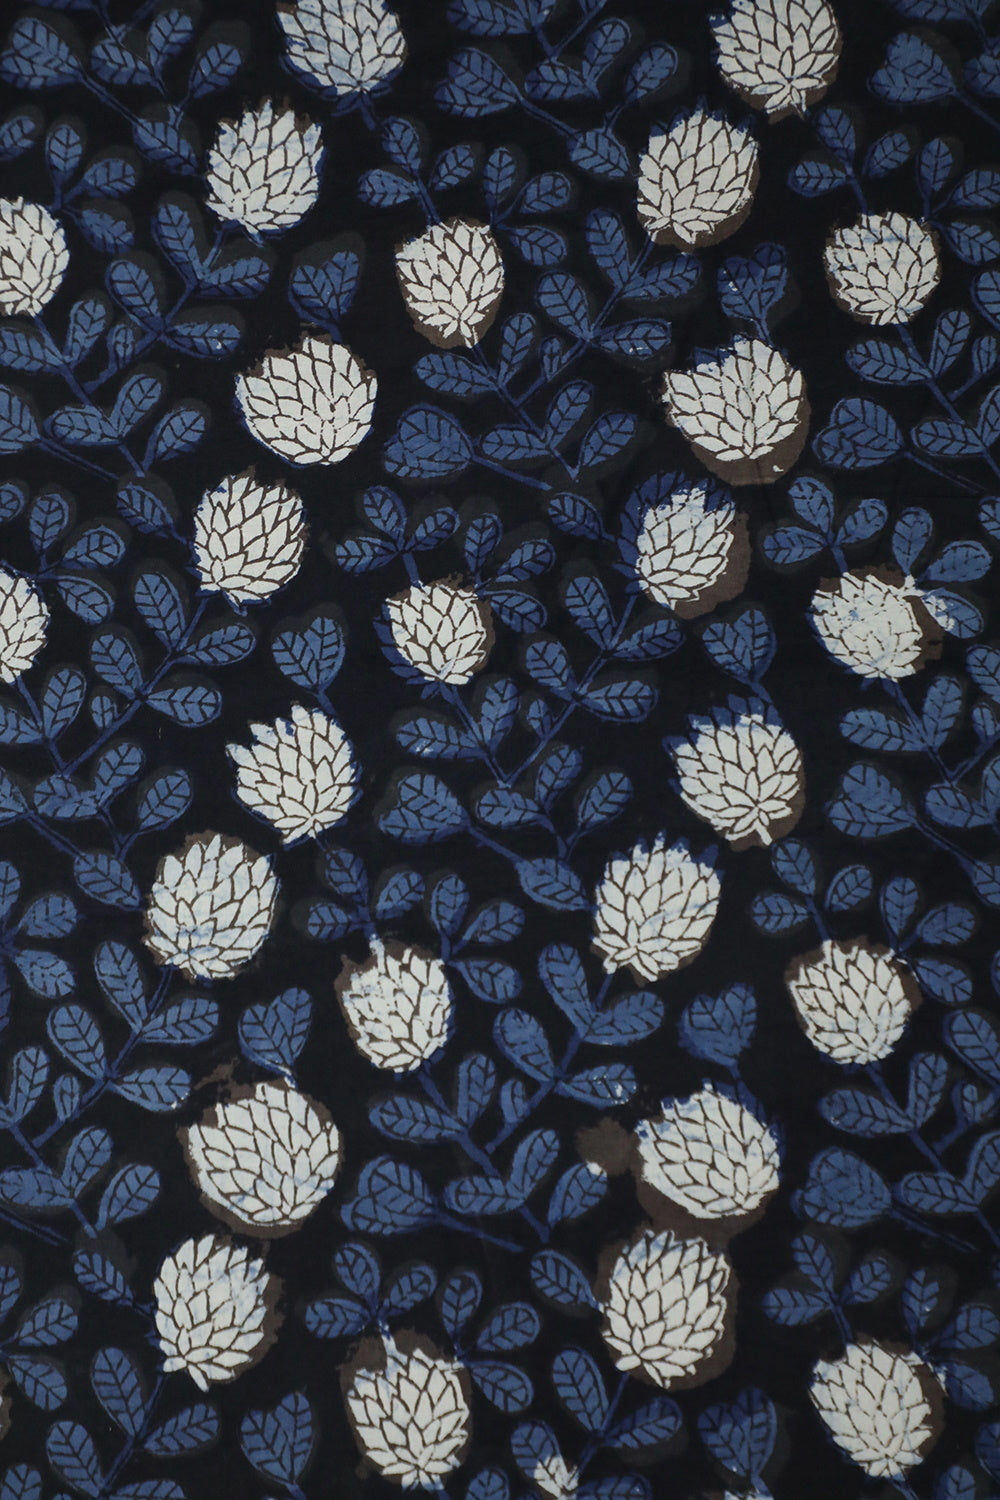 Black with White & Blue Floral Block Printed Cotton Fabric